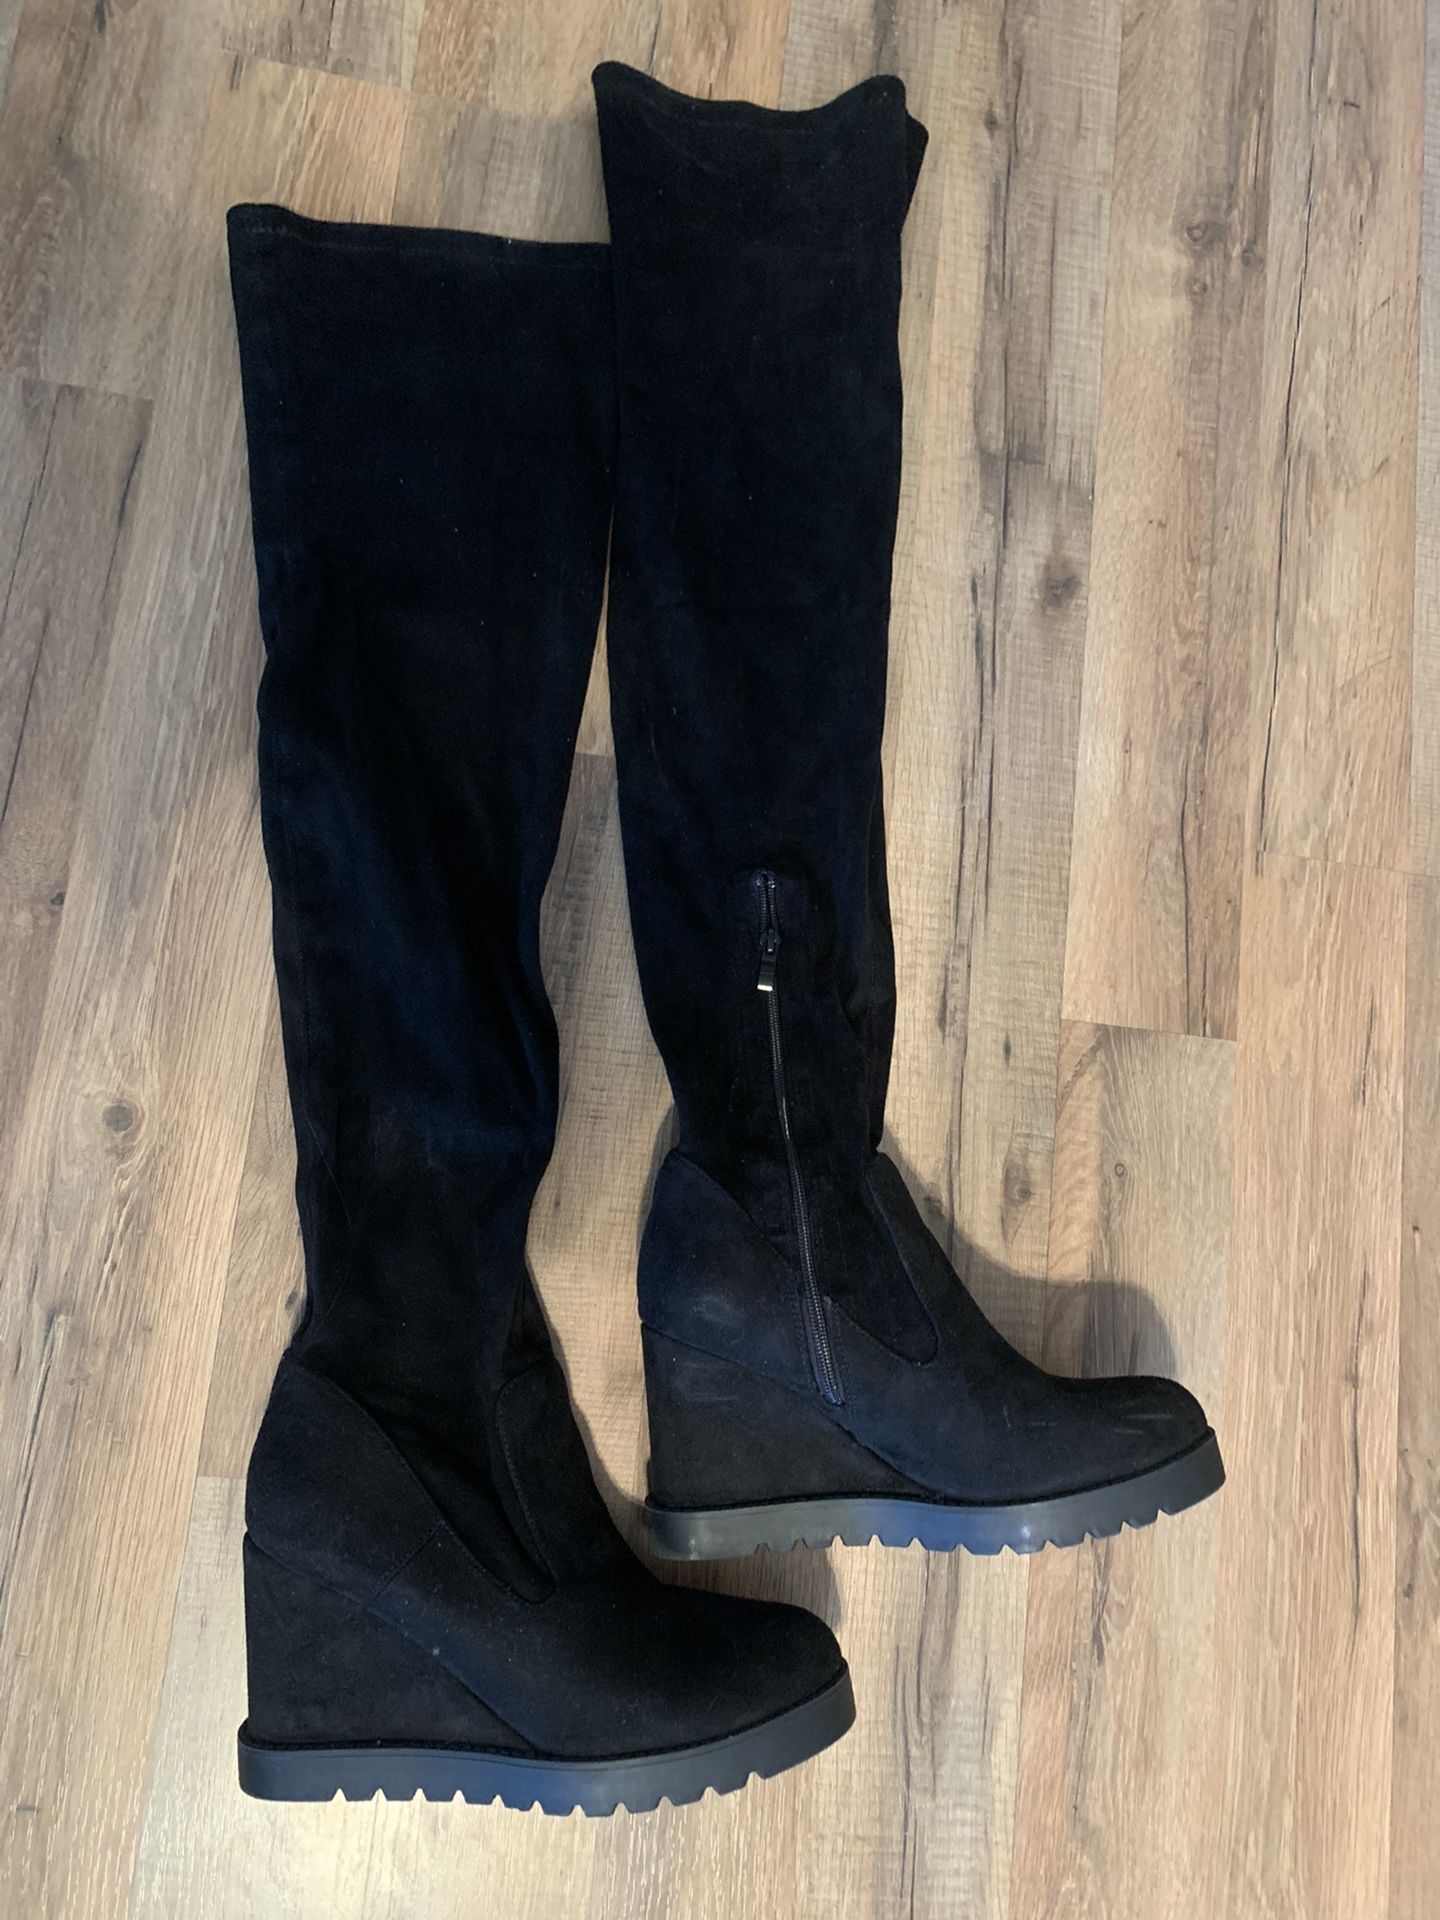 Black thigh high faux suede hidden wedge boots size 9